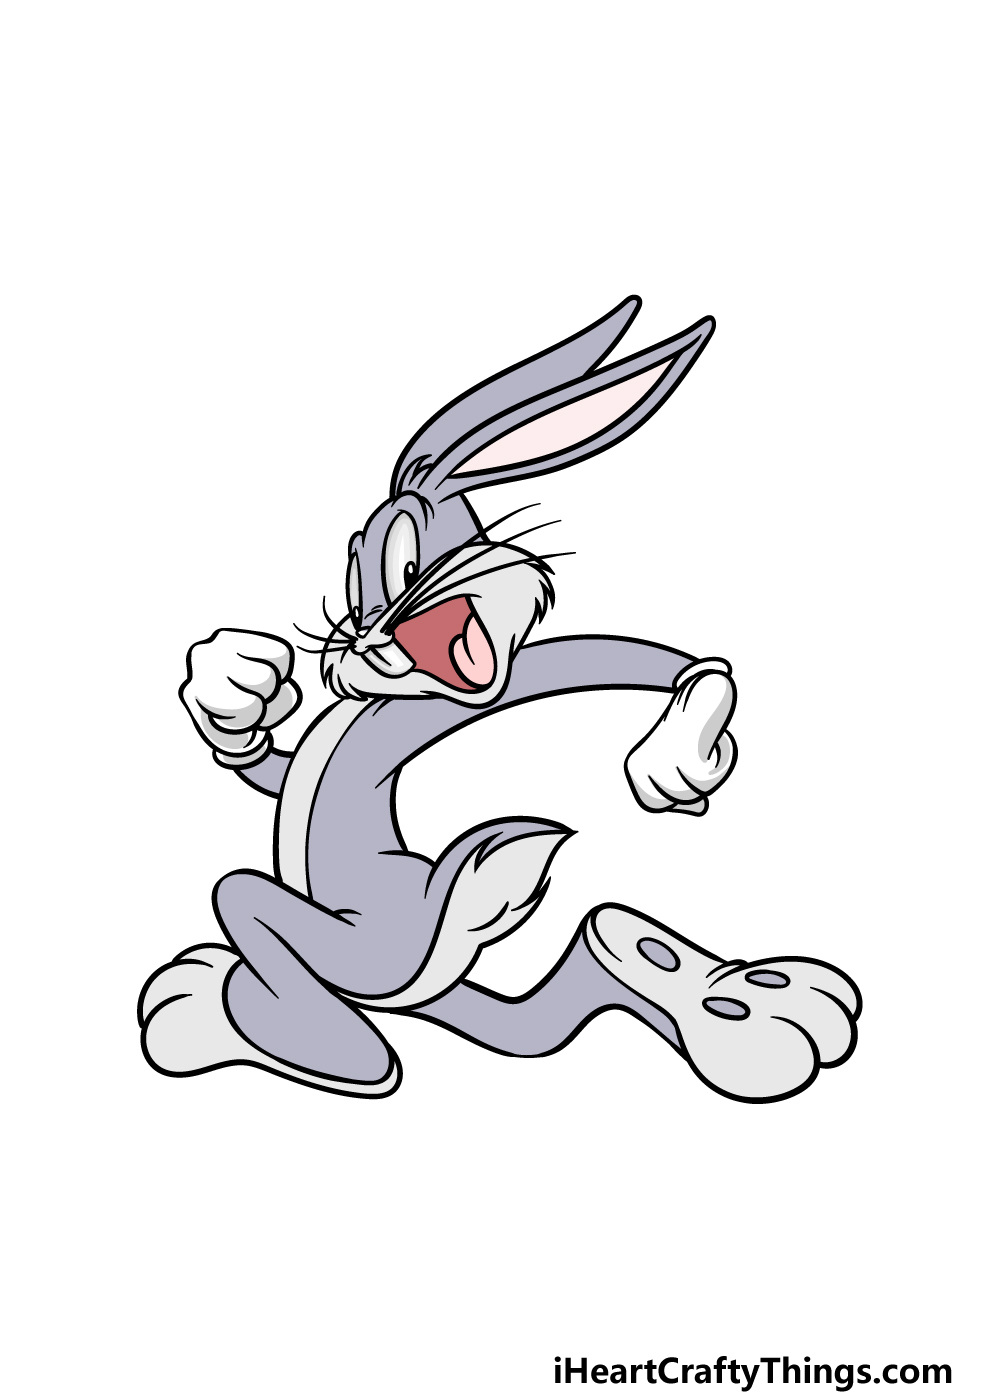 Bugs Bunny Drawing - How To Draw Bugs Bunny Step By Step